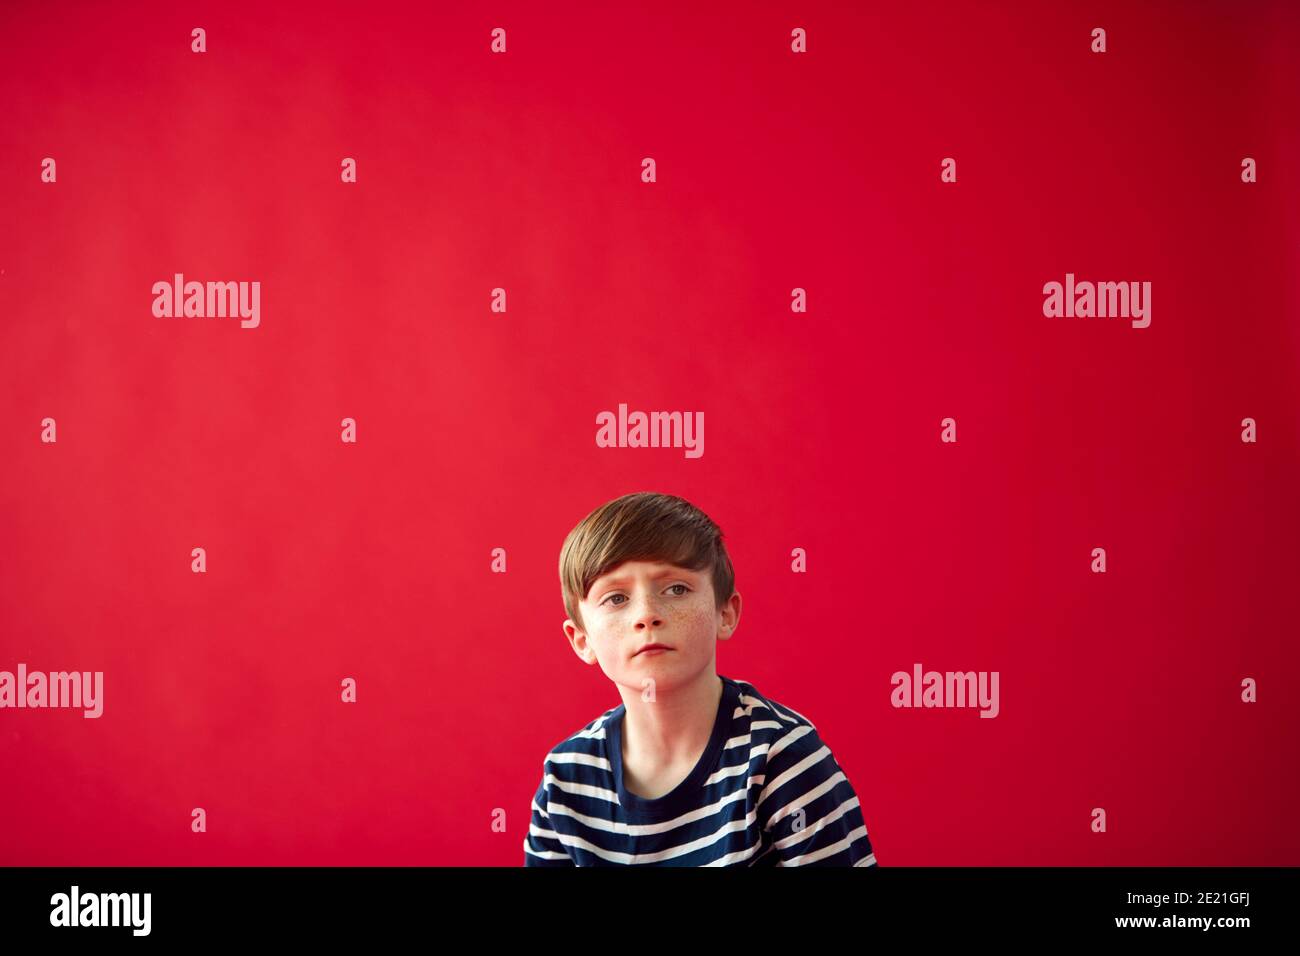 Portrait Of Thoughtful Young Boy Against Red Studio Background Stock Photo